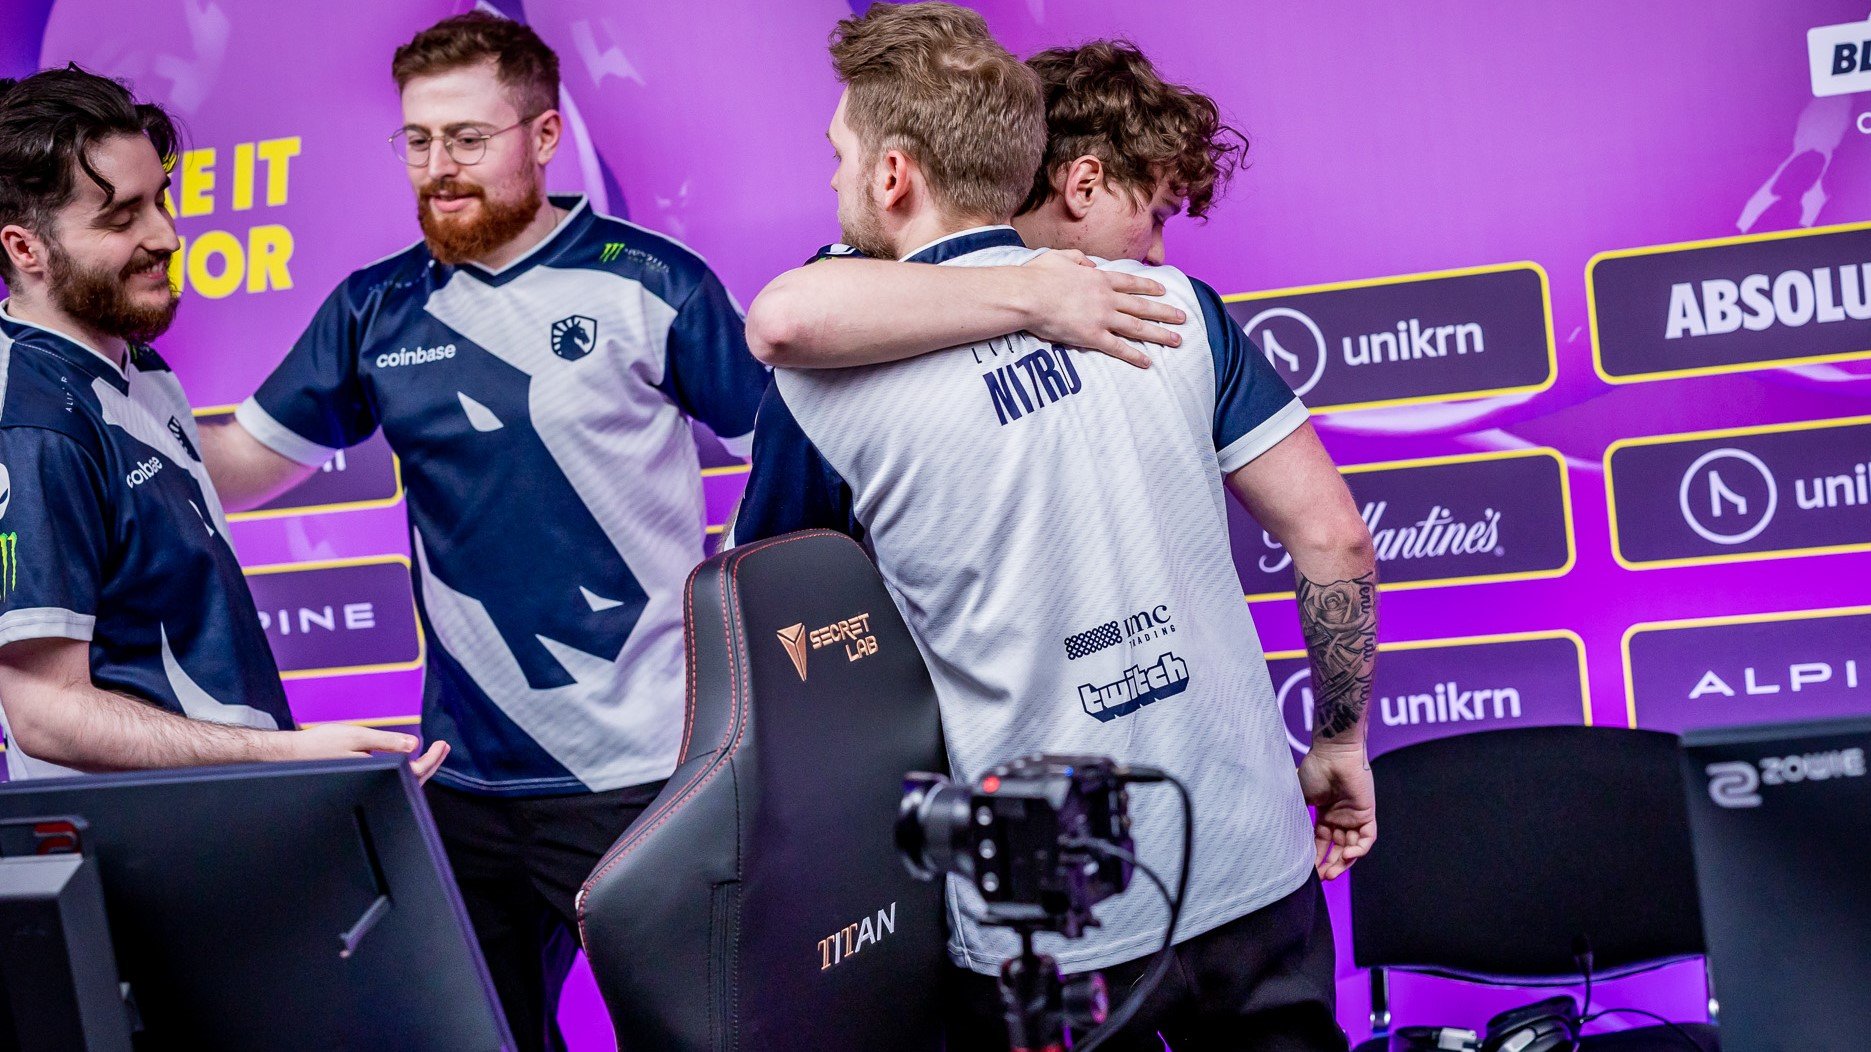 Team Liquid CSGO are 'not ready to win yet', according to one of their